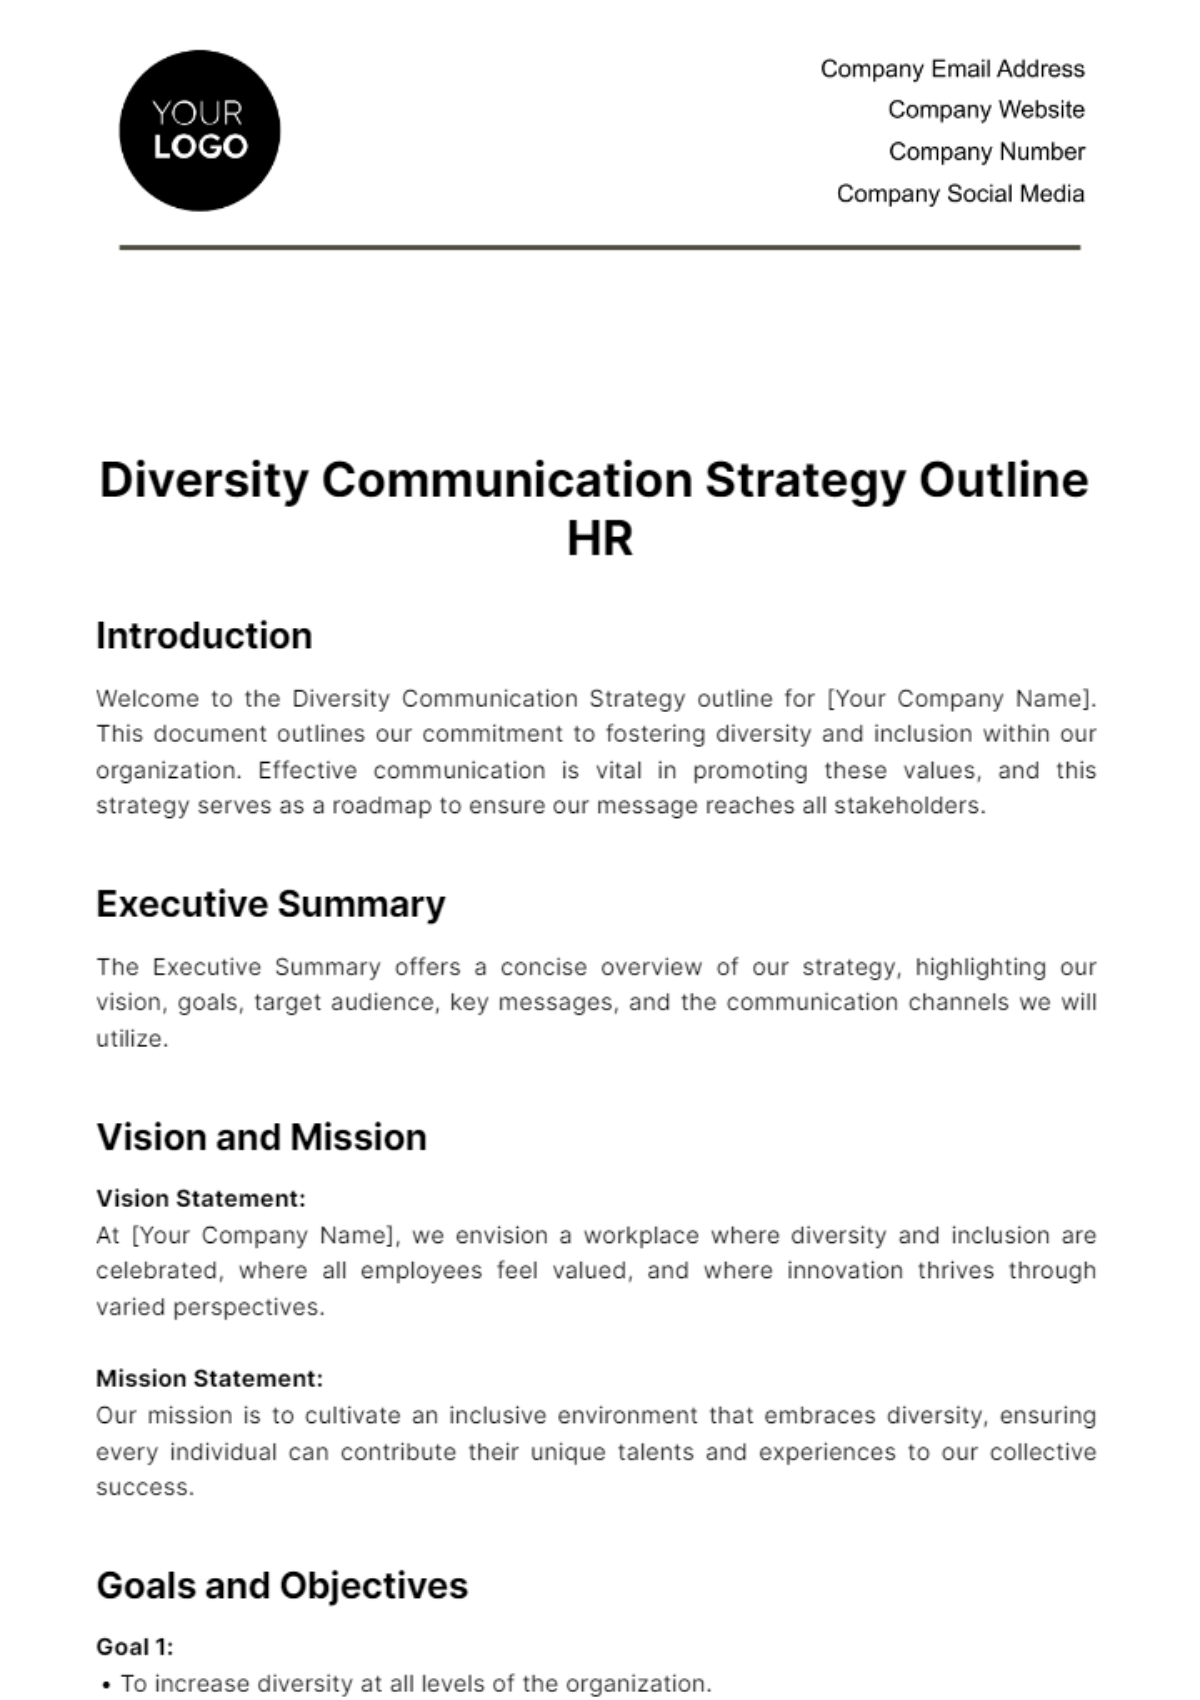 Free Diversity Communication Strategy Outline HR Template